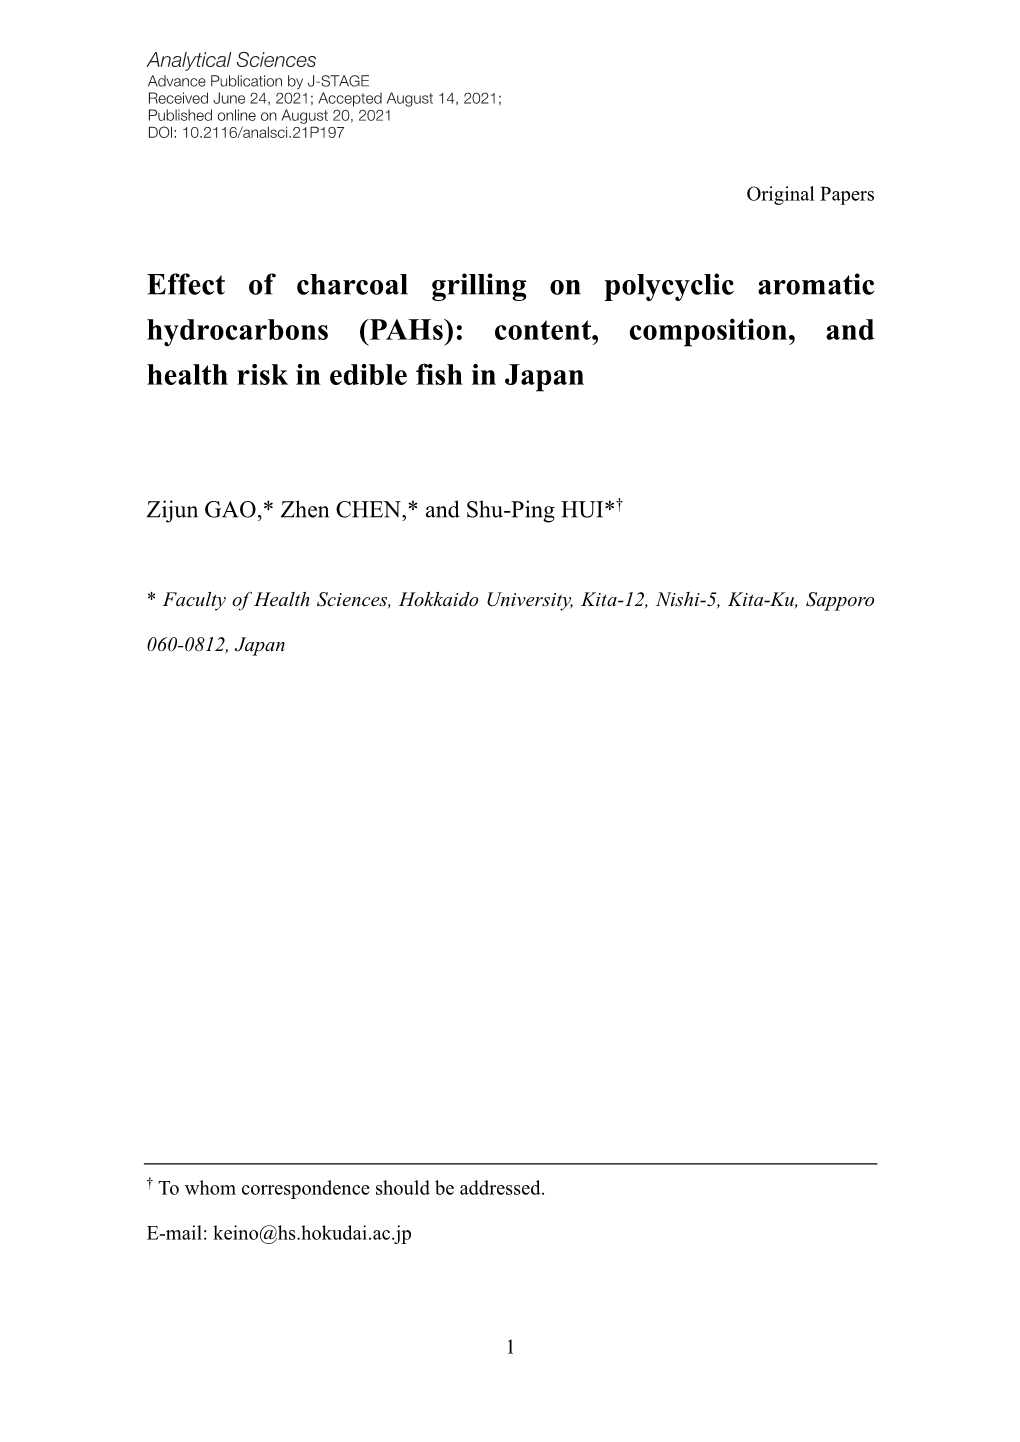 Effect of Charcoal Grilling on Polycyclic Aromatic Hydrocarbons (Pahs): Content, Composition, and Health Risk in Edible Fish in Japan